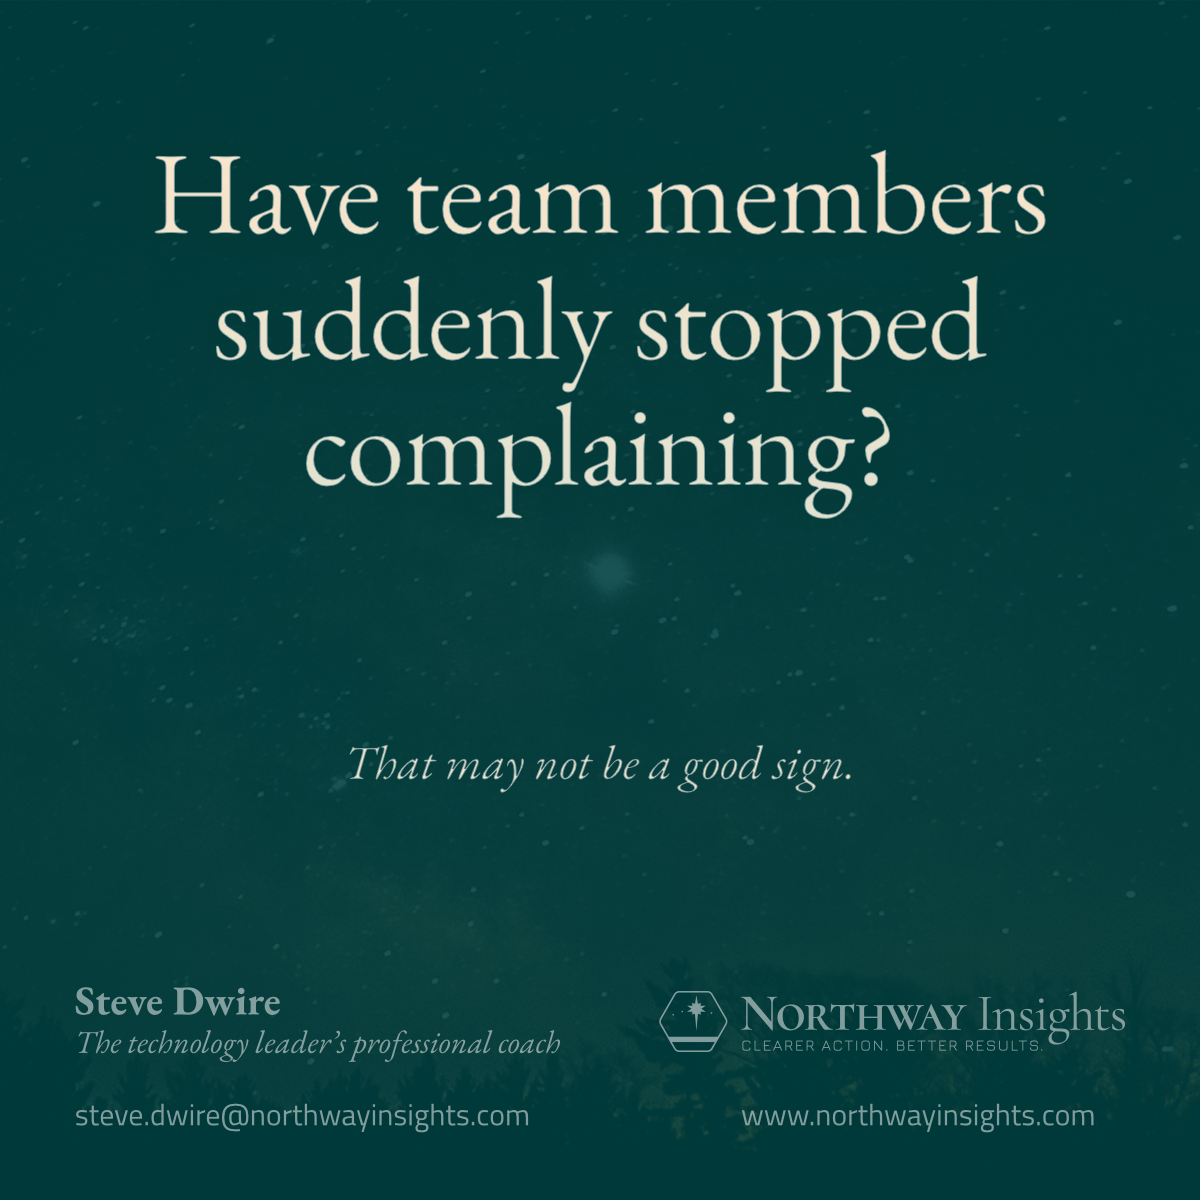 Have team members suddenly stopped complaining? (That may not be a good sign.)